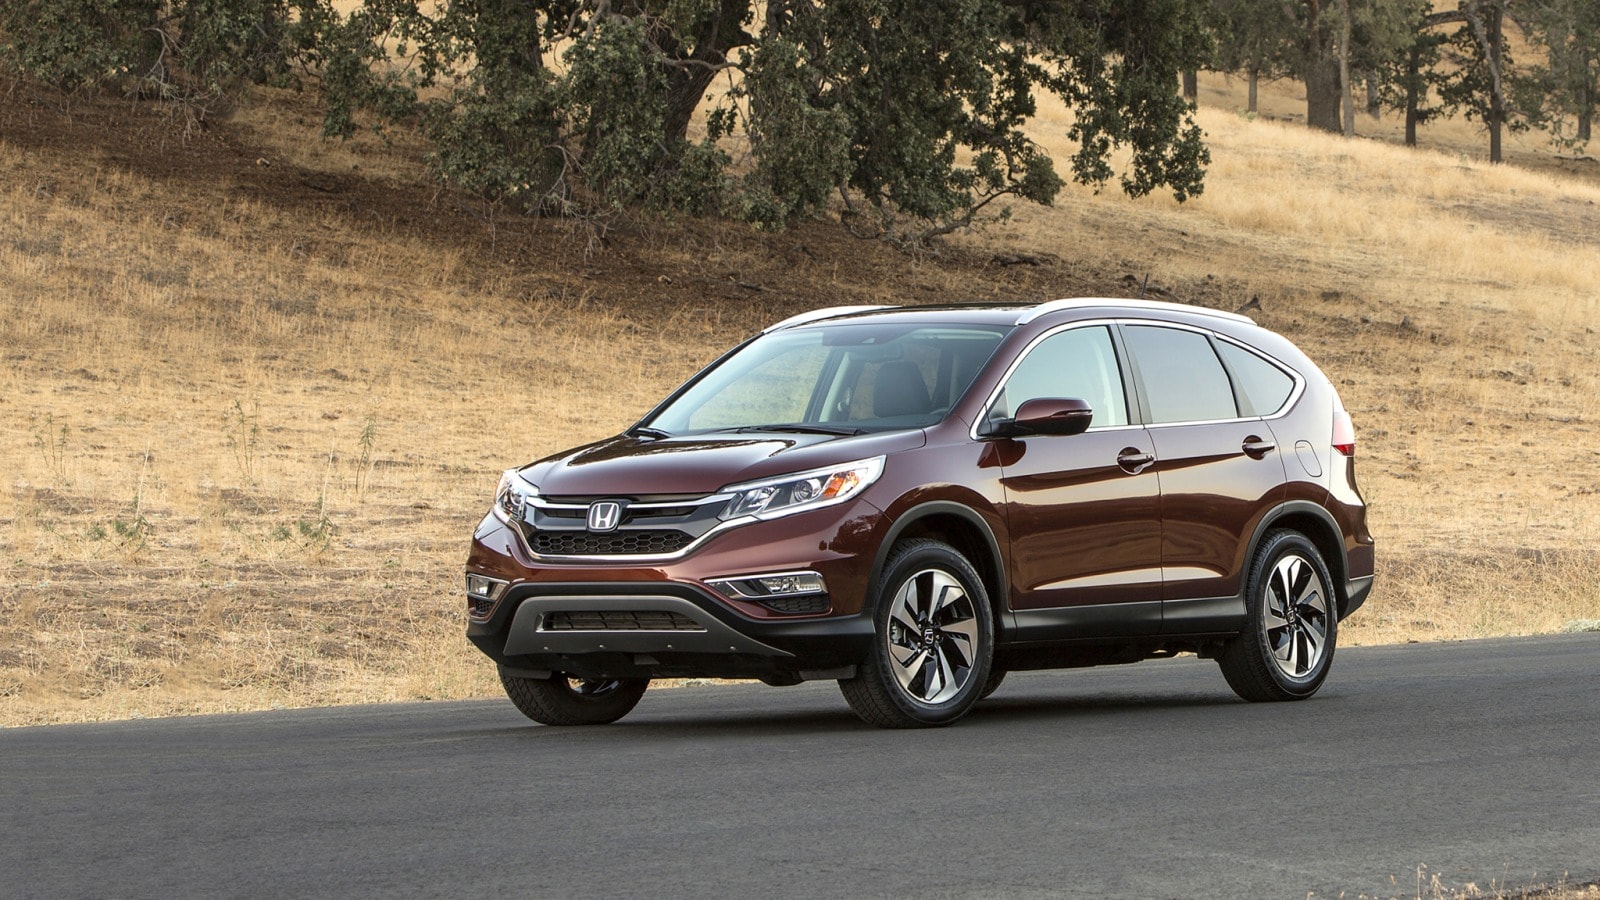 Best Used SUVs: Top-Rated CPO and Used SUVs | Edmunds